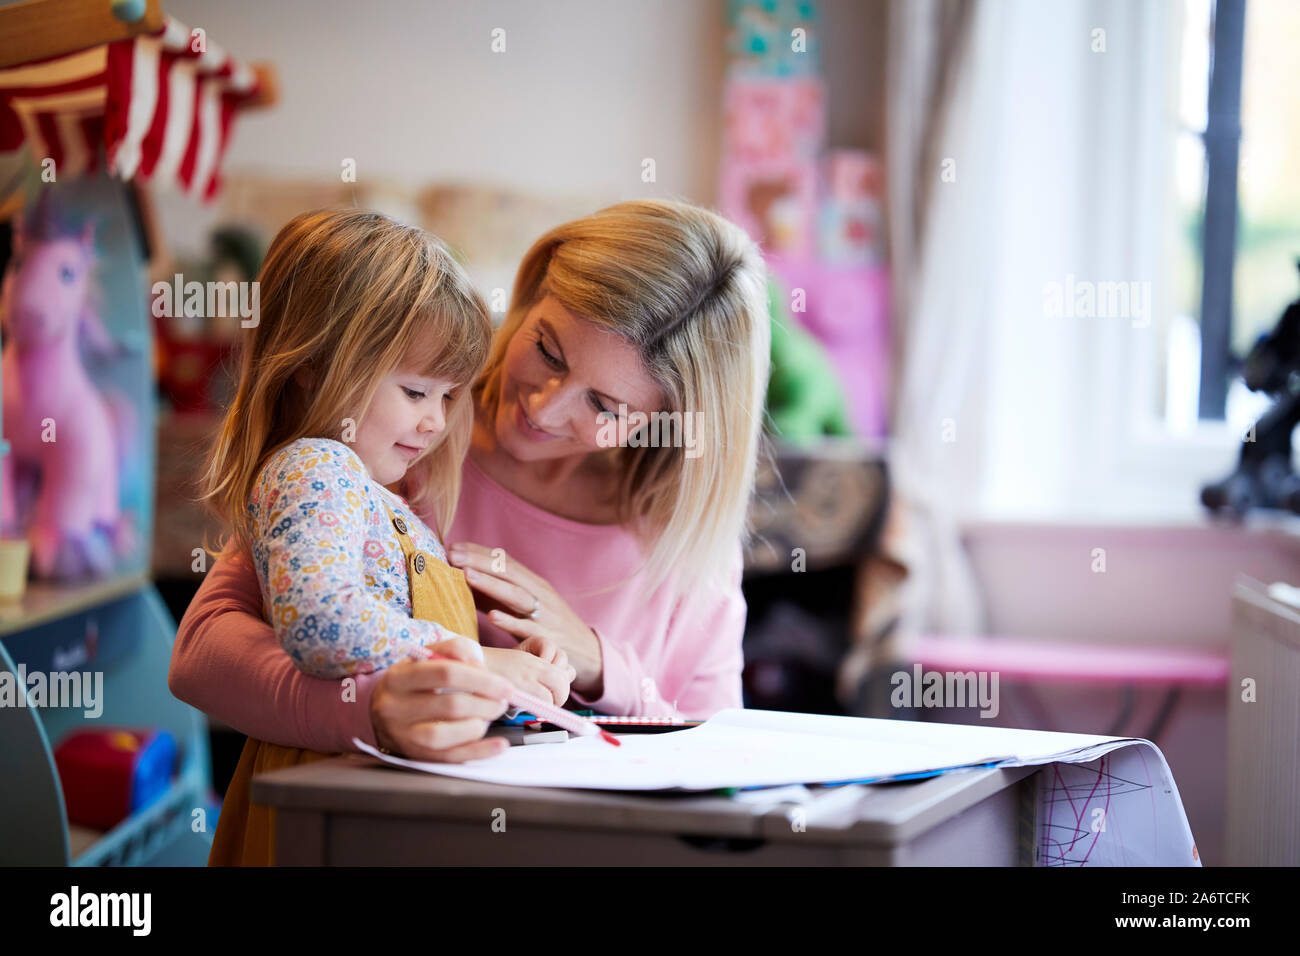 Mum and daughter drawing together Stock Photo